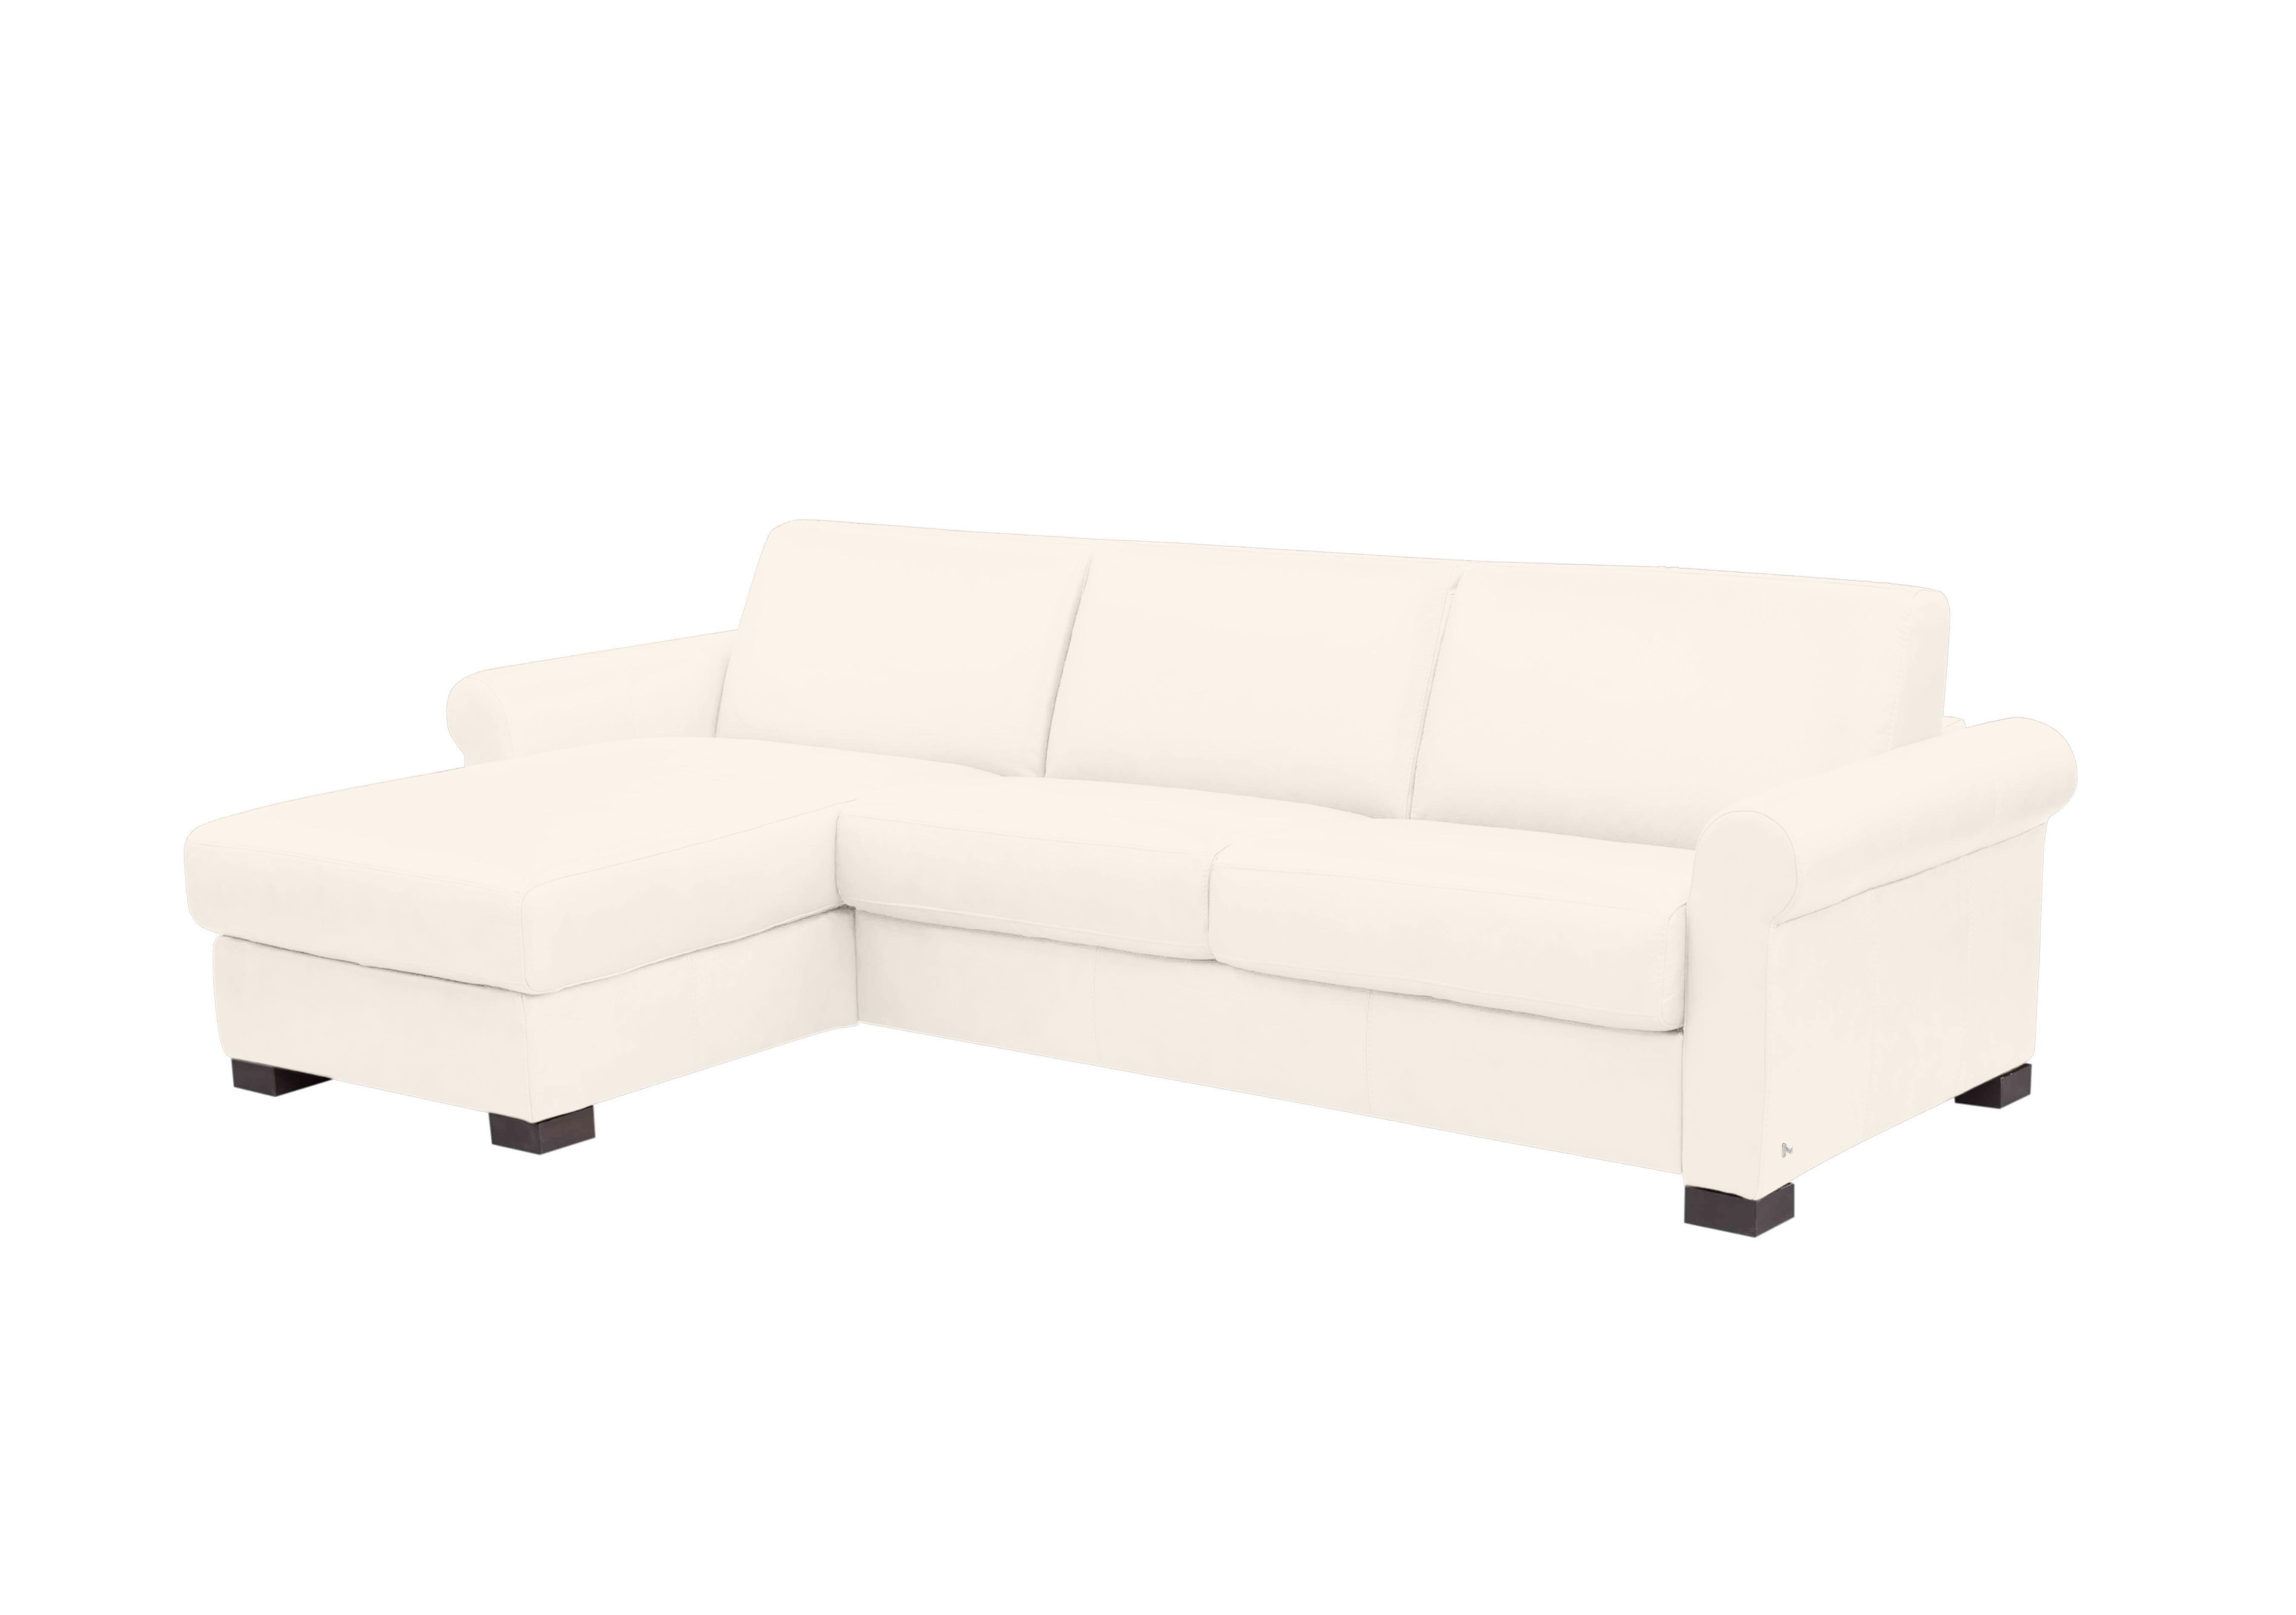 Alcova 3 Seater Leather Sofa Bed with Storage Chaise with Scroll Arms in Torello Bianco 93 on Furniture Village